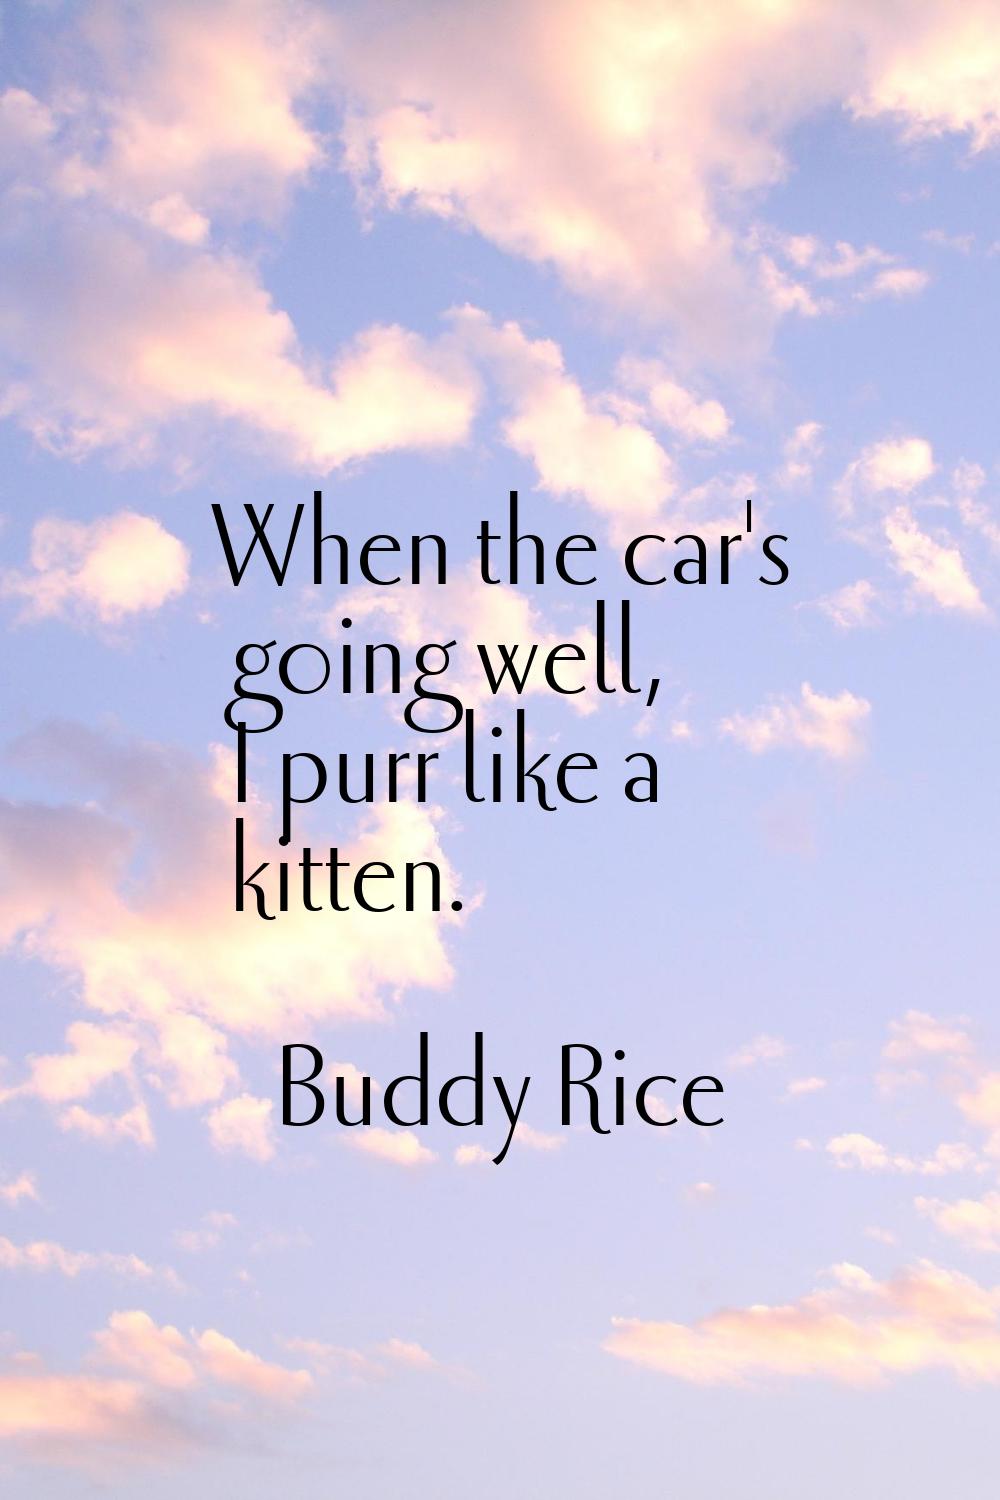 When the car's going well, I purr like a kitten.